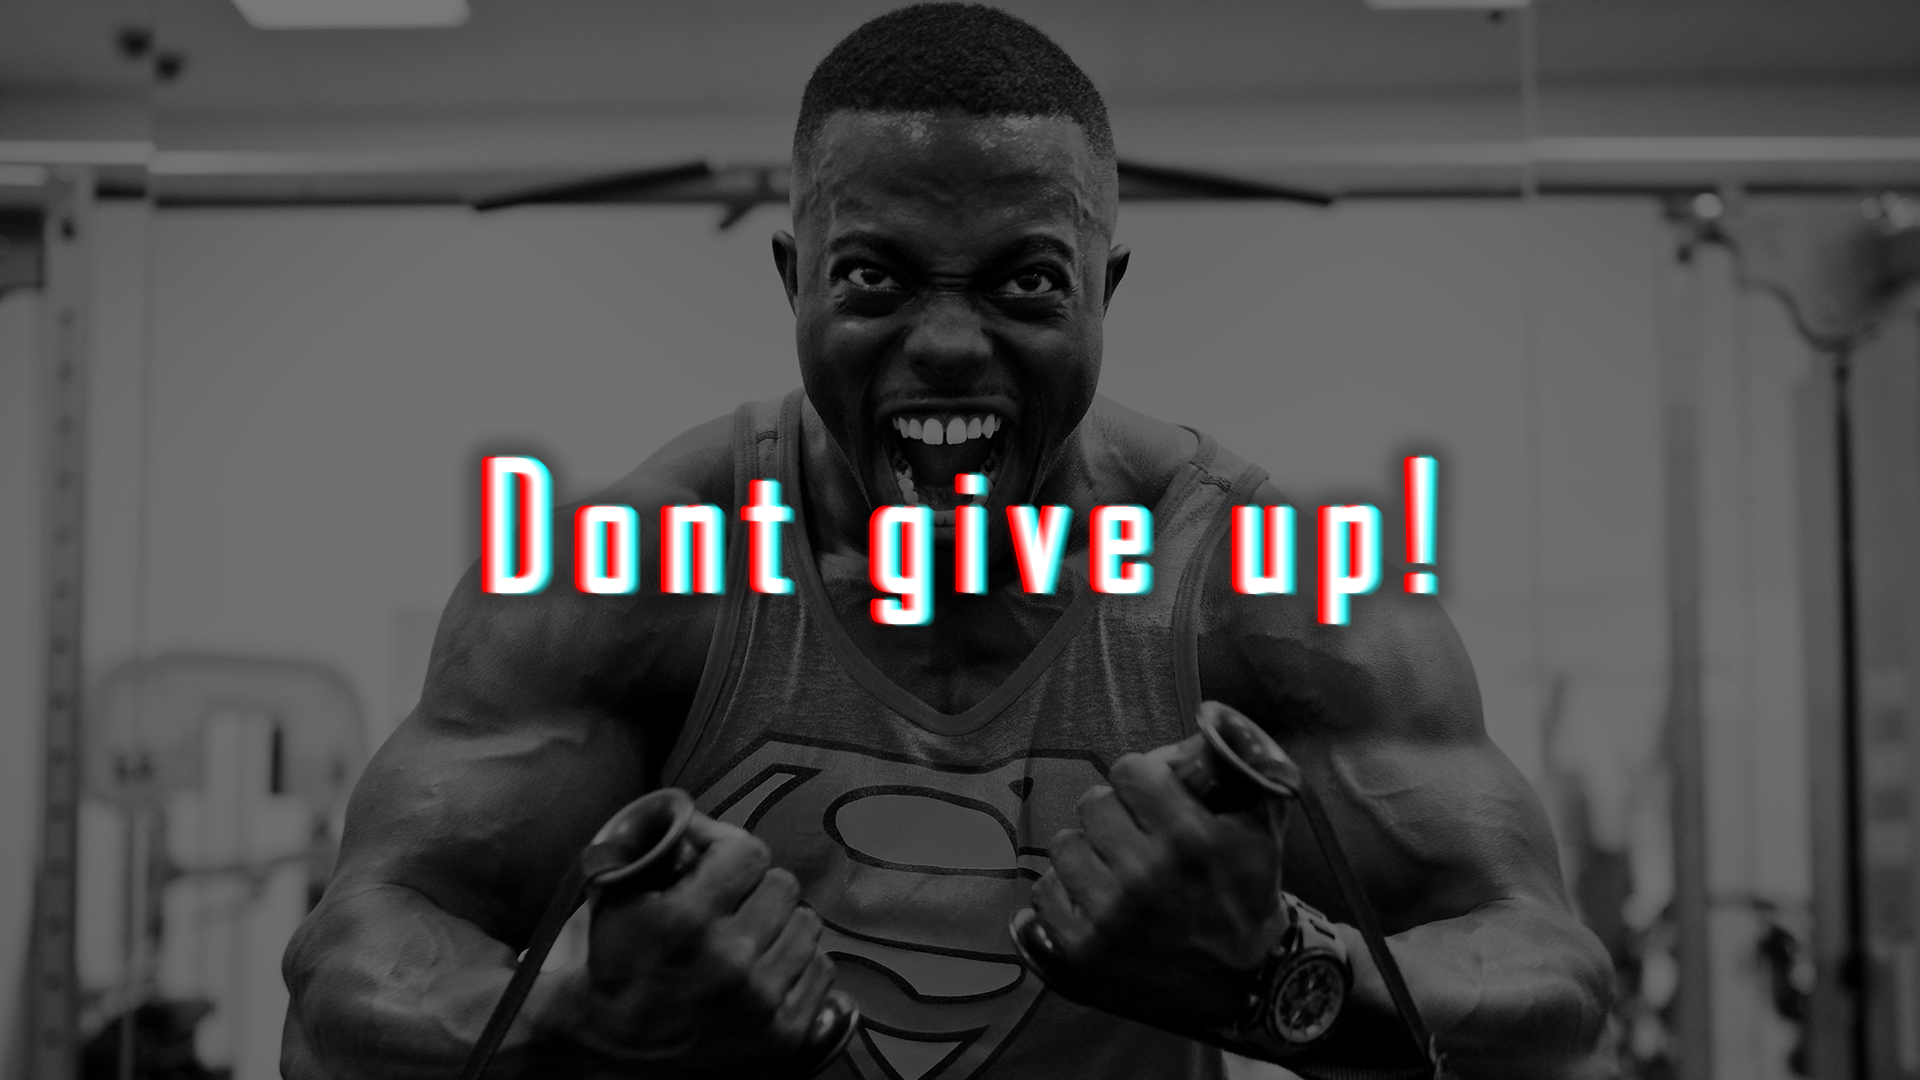 Never give up wallpaper — Steemit